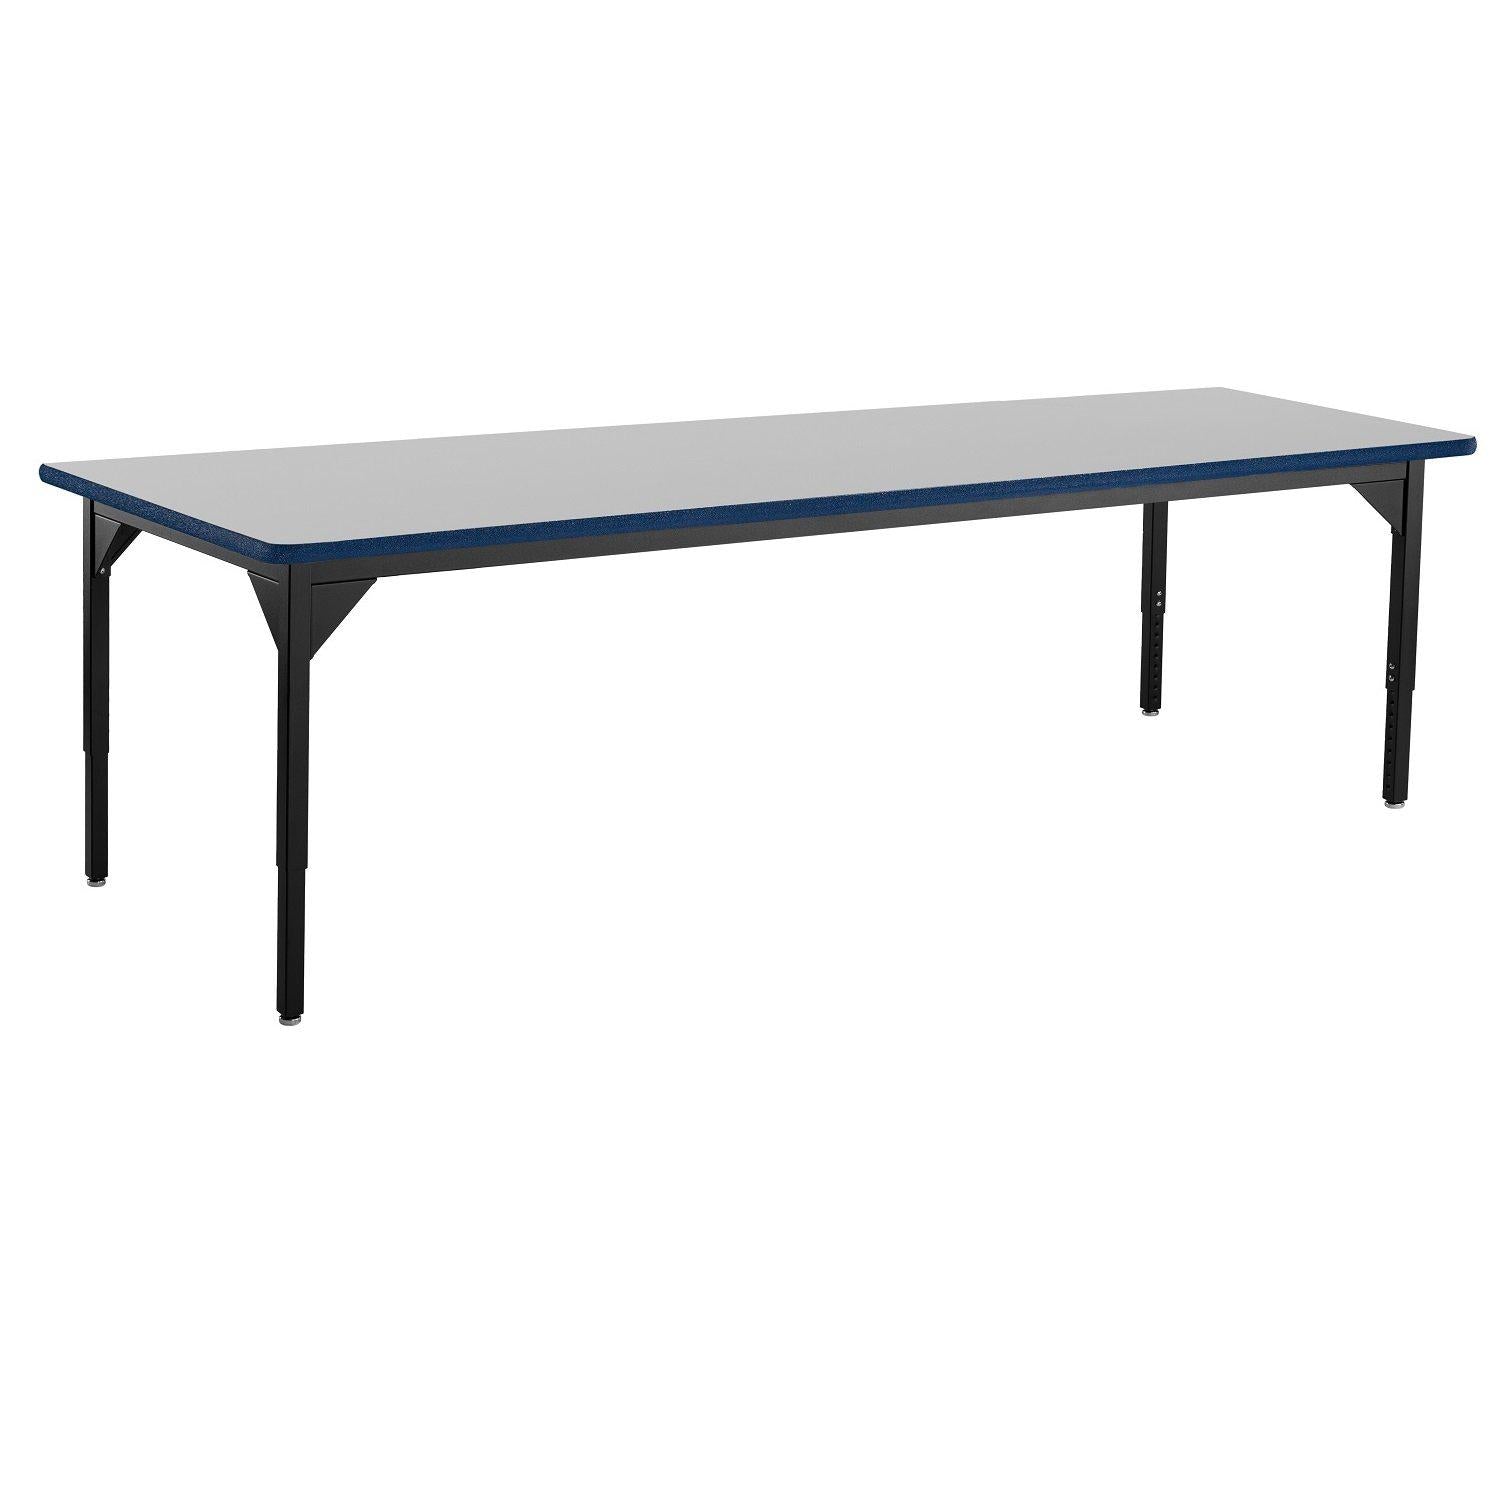 Heavy-Duty Height-Adjustable Utility Table, Black Frame, 48" x 96", Supreme High-Pressure Laminate Top with Black ProtectEdge